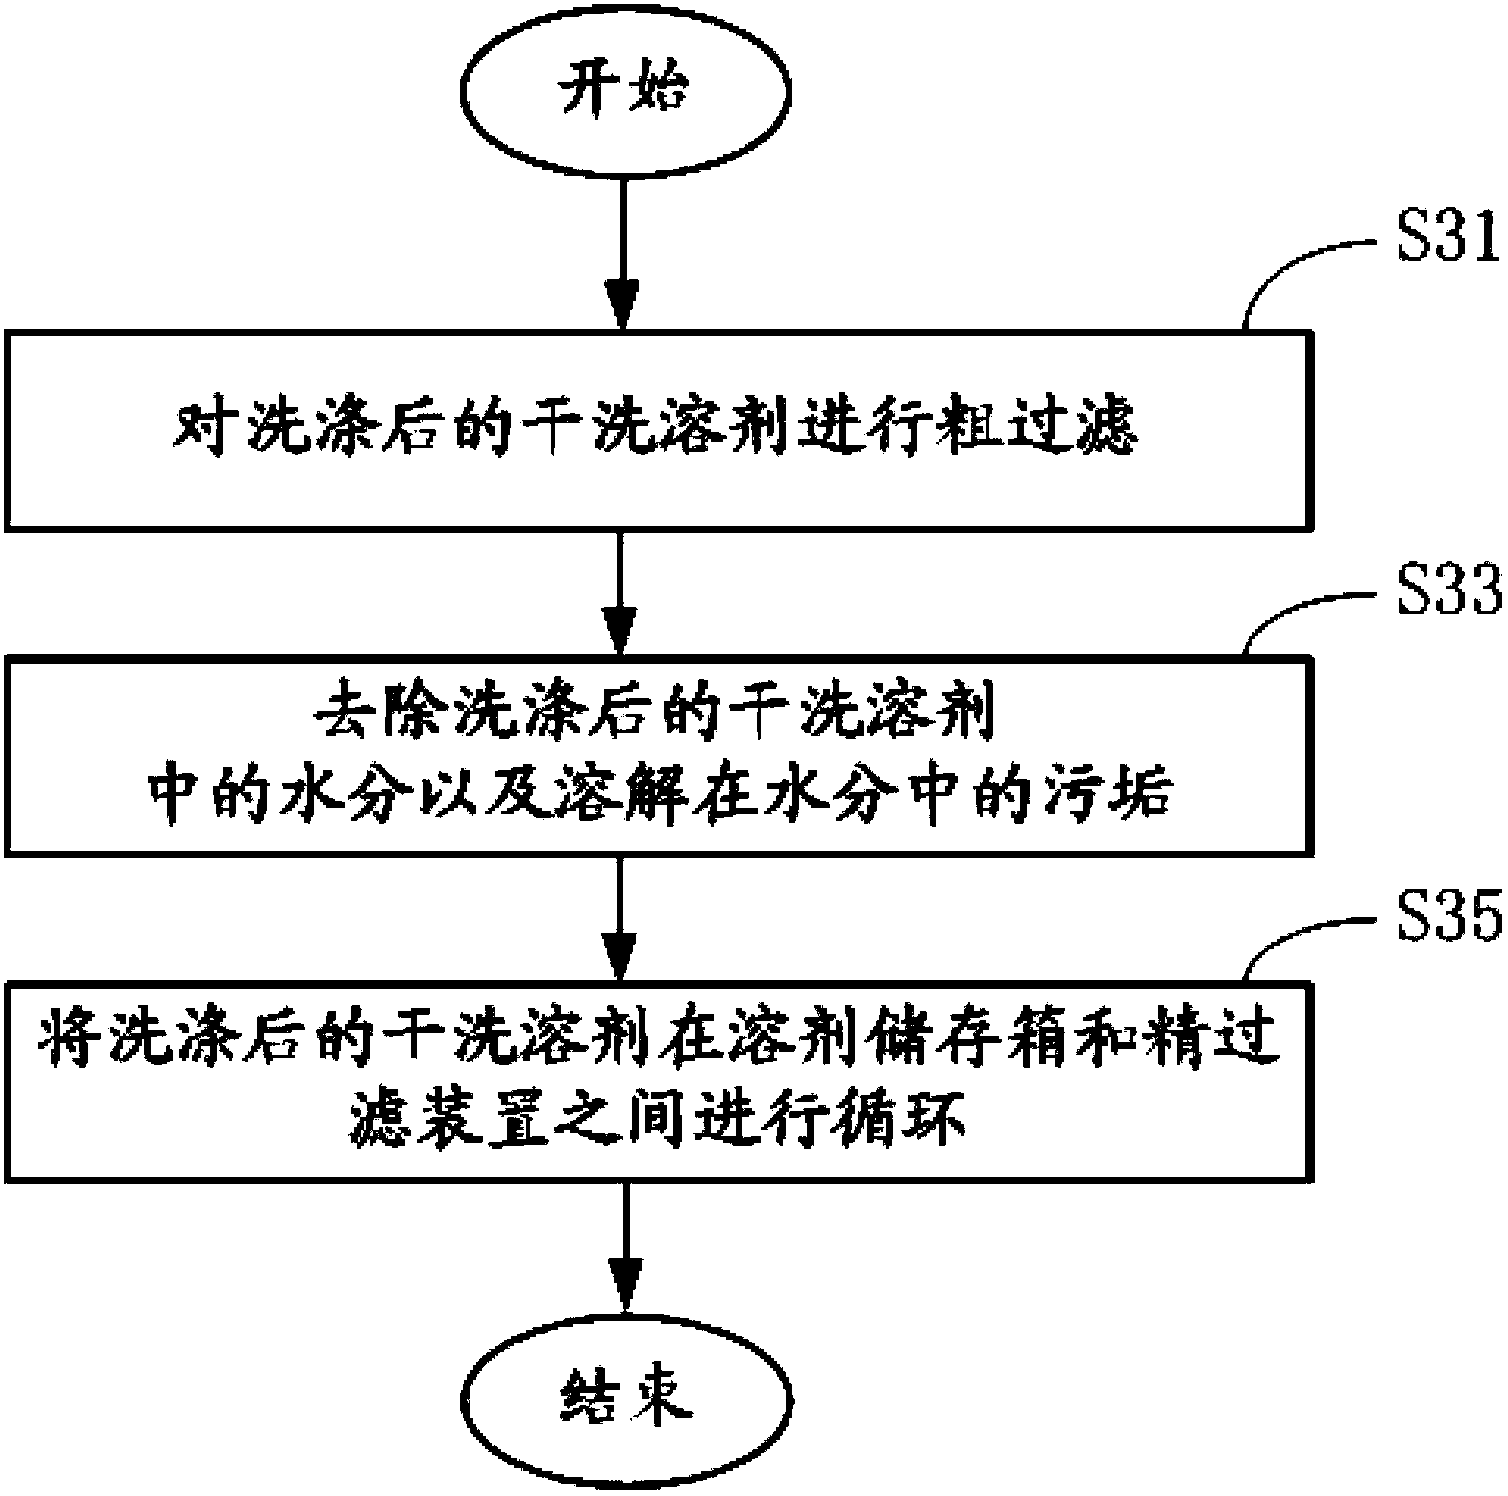 Dry cleaning machine and solvent reclamation system and method